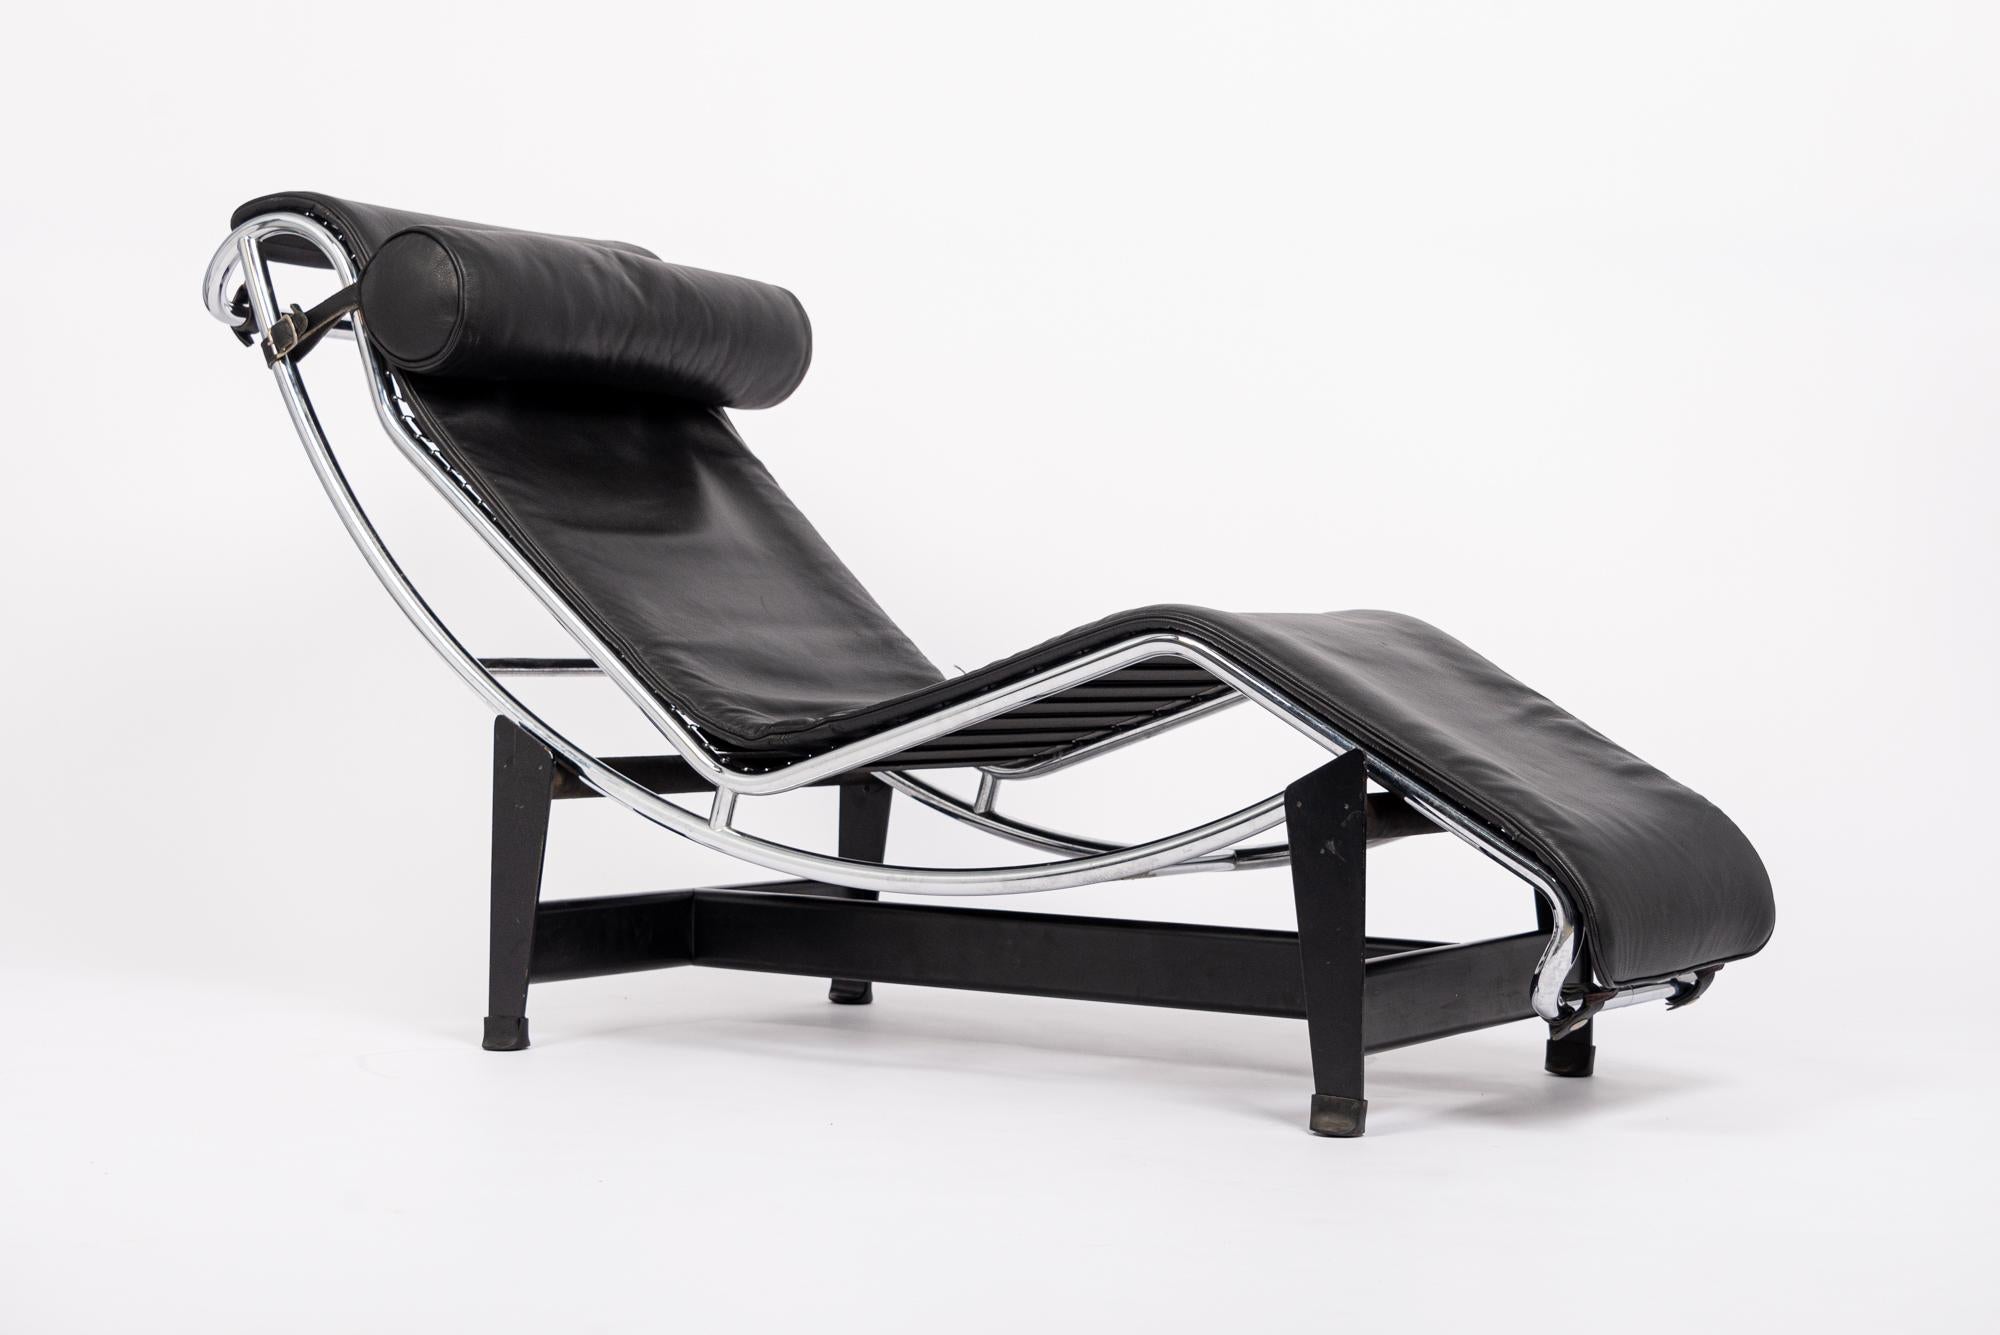 The LC4 chaise lounge is a Bauhaus classic and is included in the permanent collection of the Museum of Modern Art in New York. Each piece is signed, numbered and manufactured by Cassina under exclusive worldwide license from the Le Corbusier